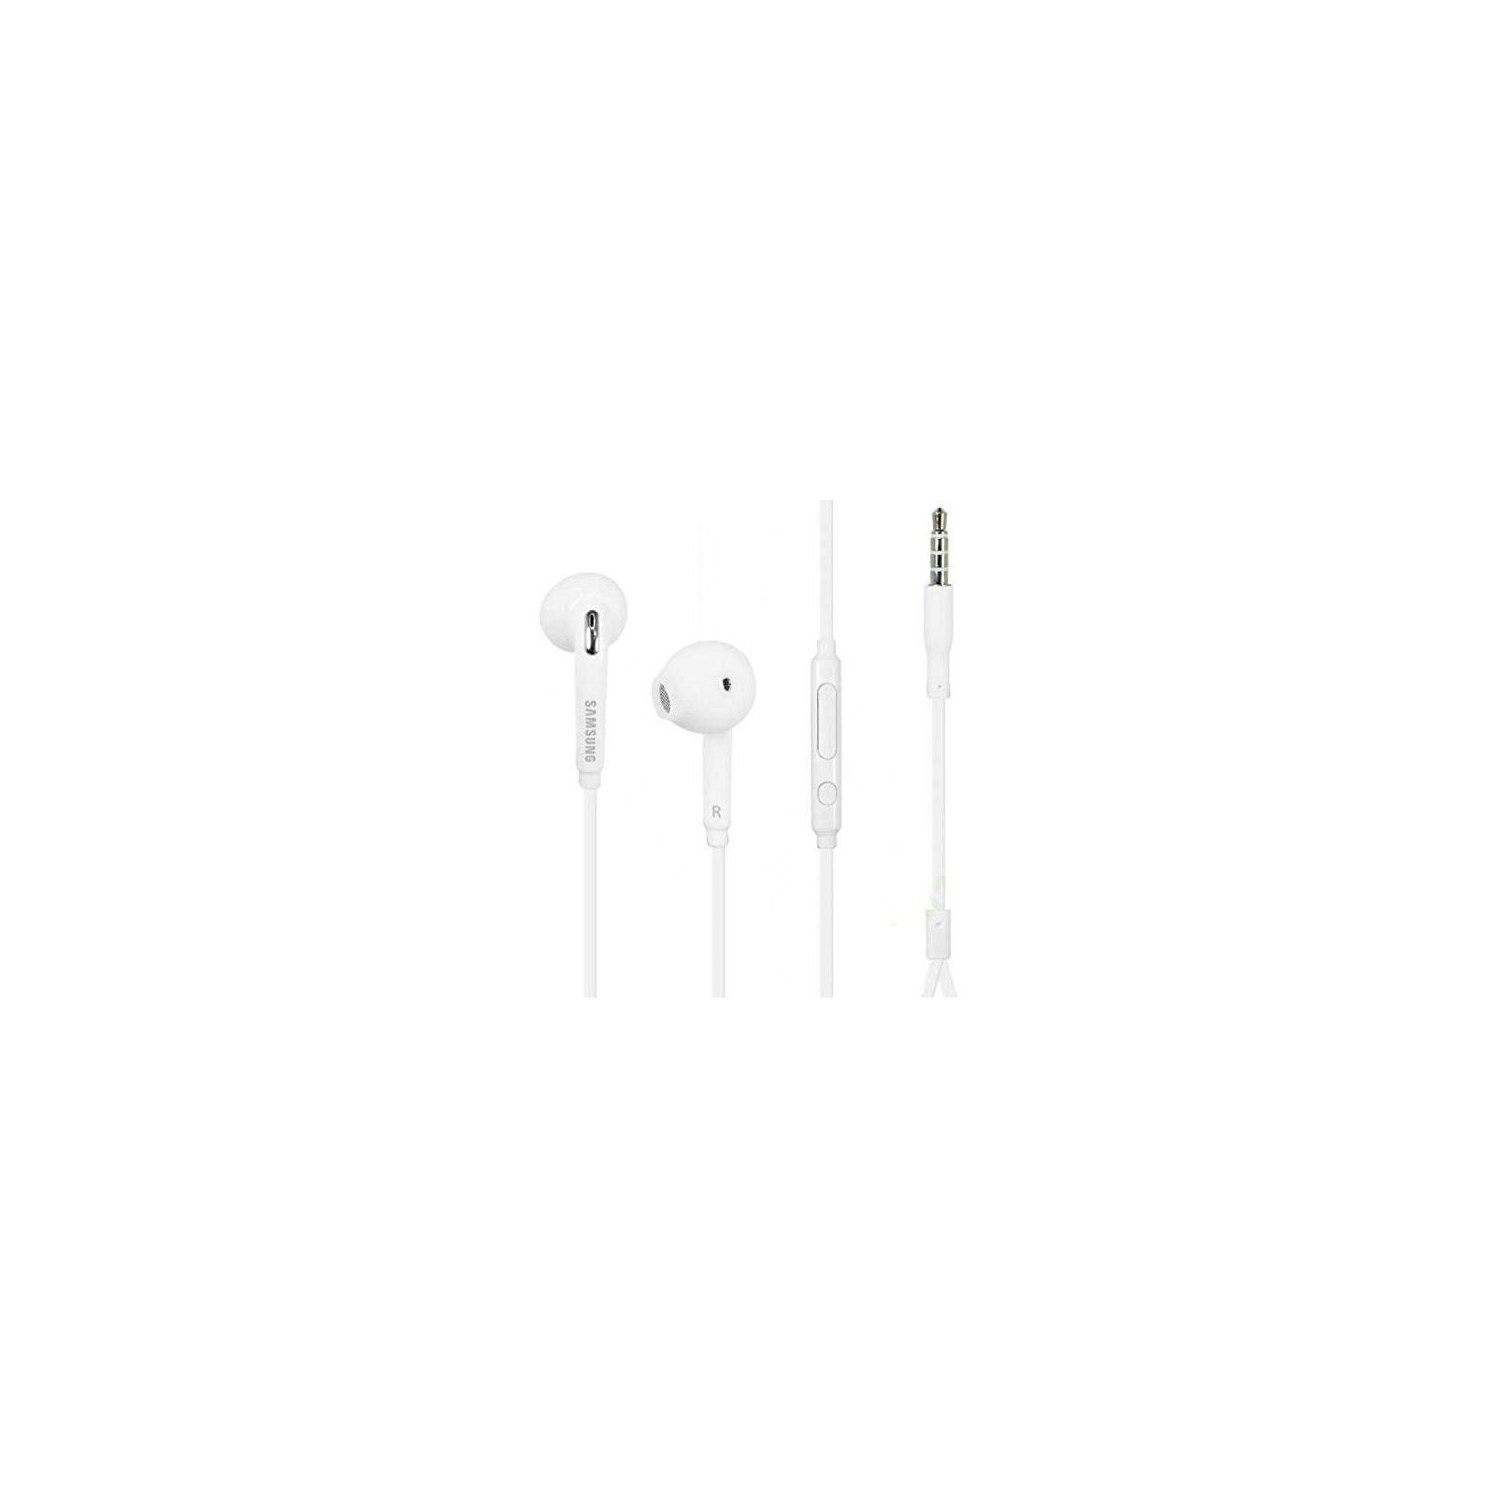 Stereo Headsets Headphones Earphones & Mic for Samsung Galaxy S6 / Note 5, White